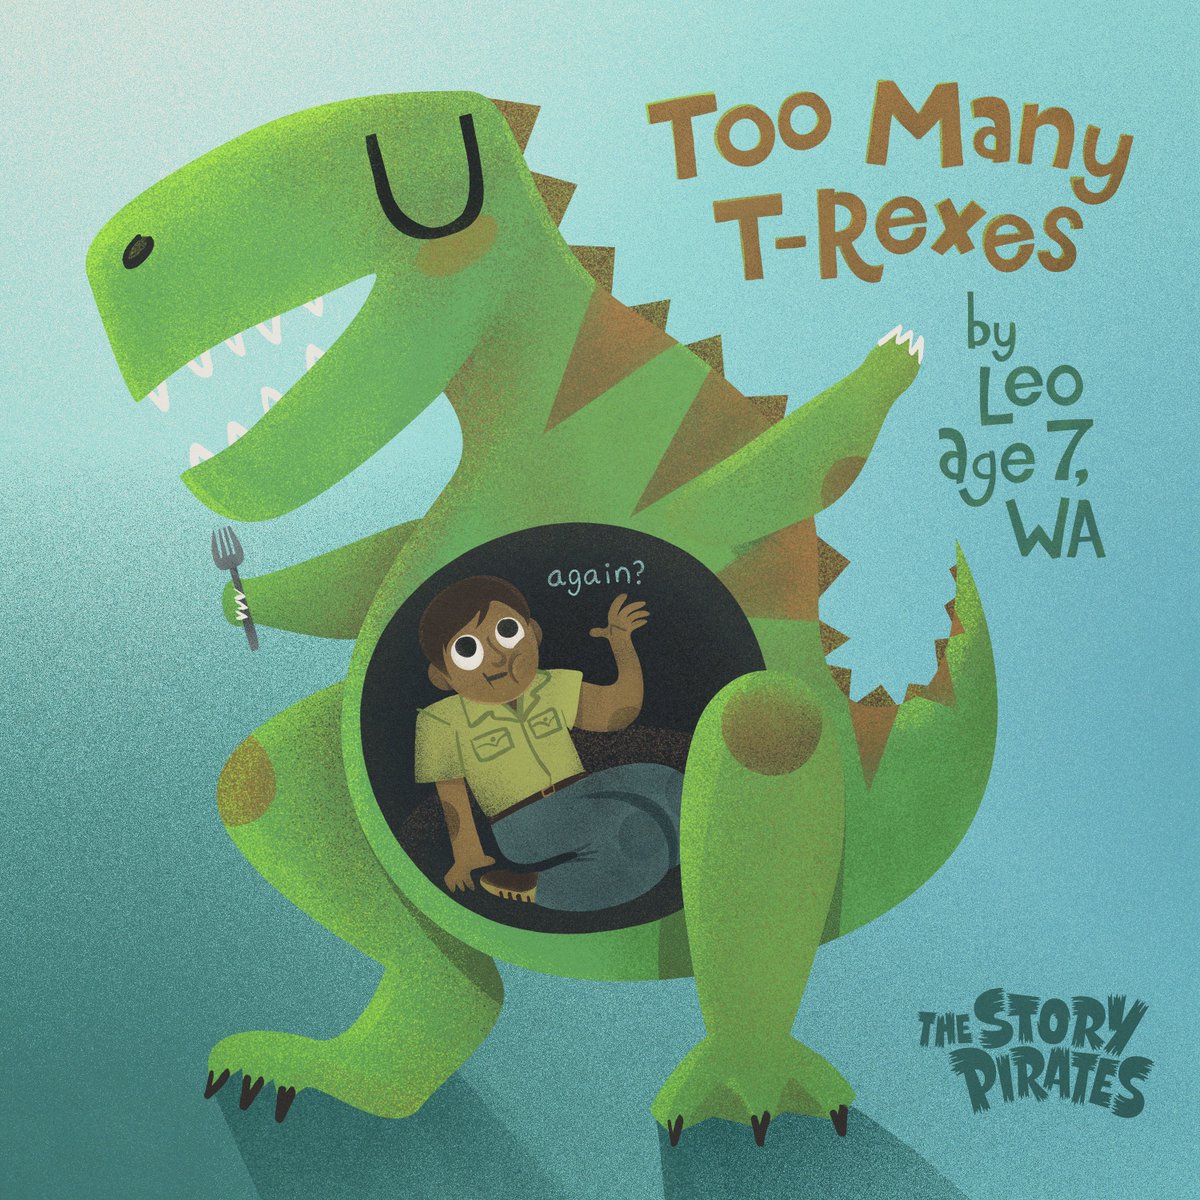 'Well... it happened again. I got eaten by a T-Rex.' - a cautionary tale by 7-year-old Leo adapted in today's NEW #StoryPiratesPodcast! 🦖megaphone.link/GLT2527227675 Today's episode also features the totes exciting 'The Opera (It's Not Boring This Time!) by 9-year-old Layla!